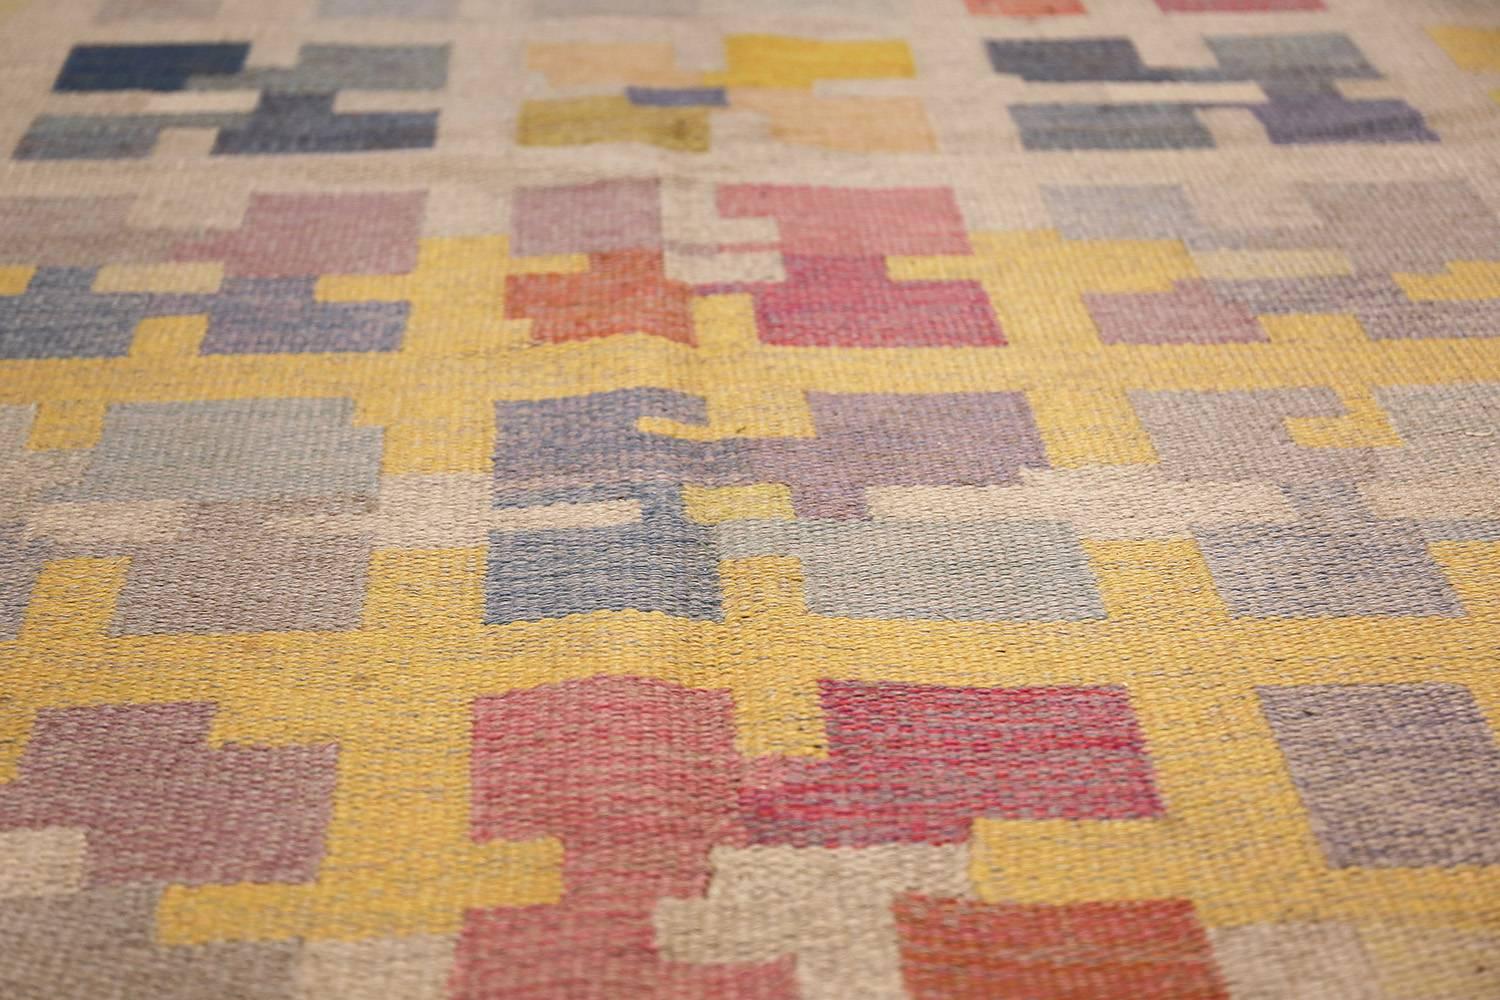 Swedish rugs and carpets have a long history in Scandinavian weaving which reaches right into the modern period. An established form of Swedish folk weaving, “Rollakans” were used as coverlets or flat-woven tapestry rugs. Swedish rugs and carpets